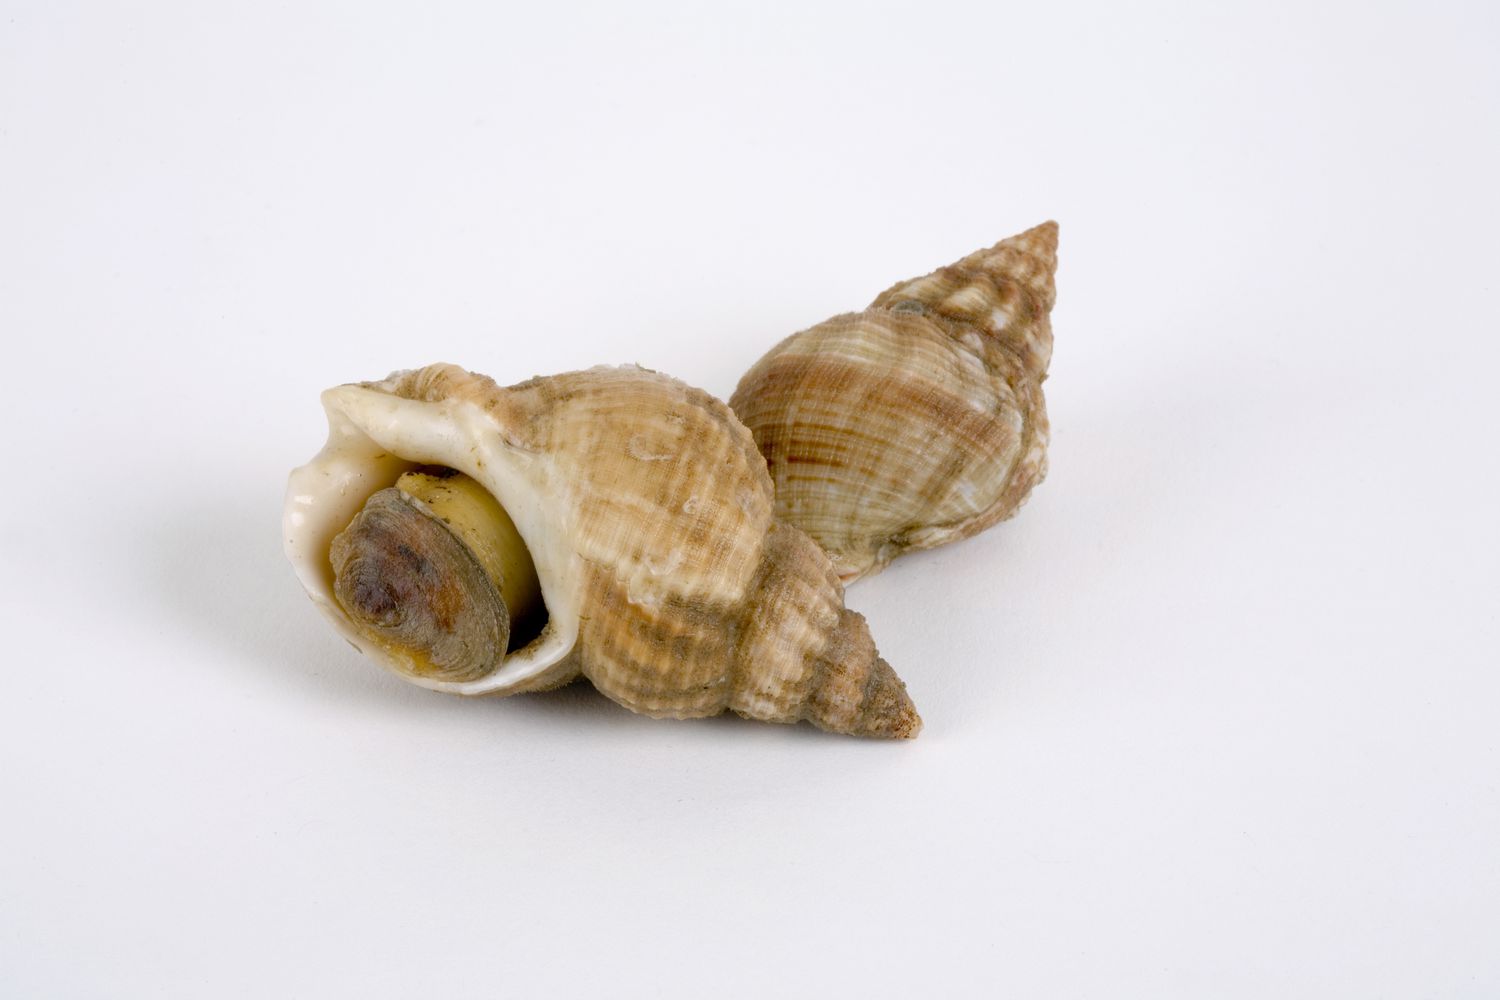 19-channeled-whelk-facts